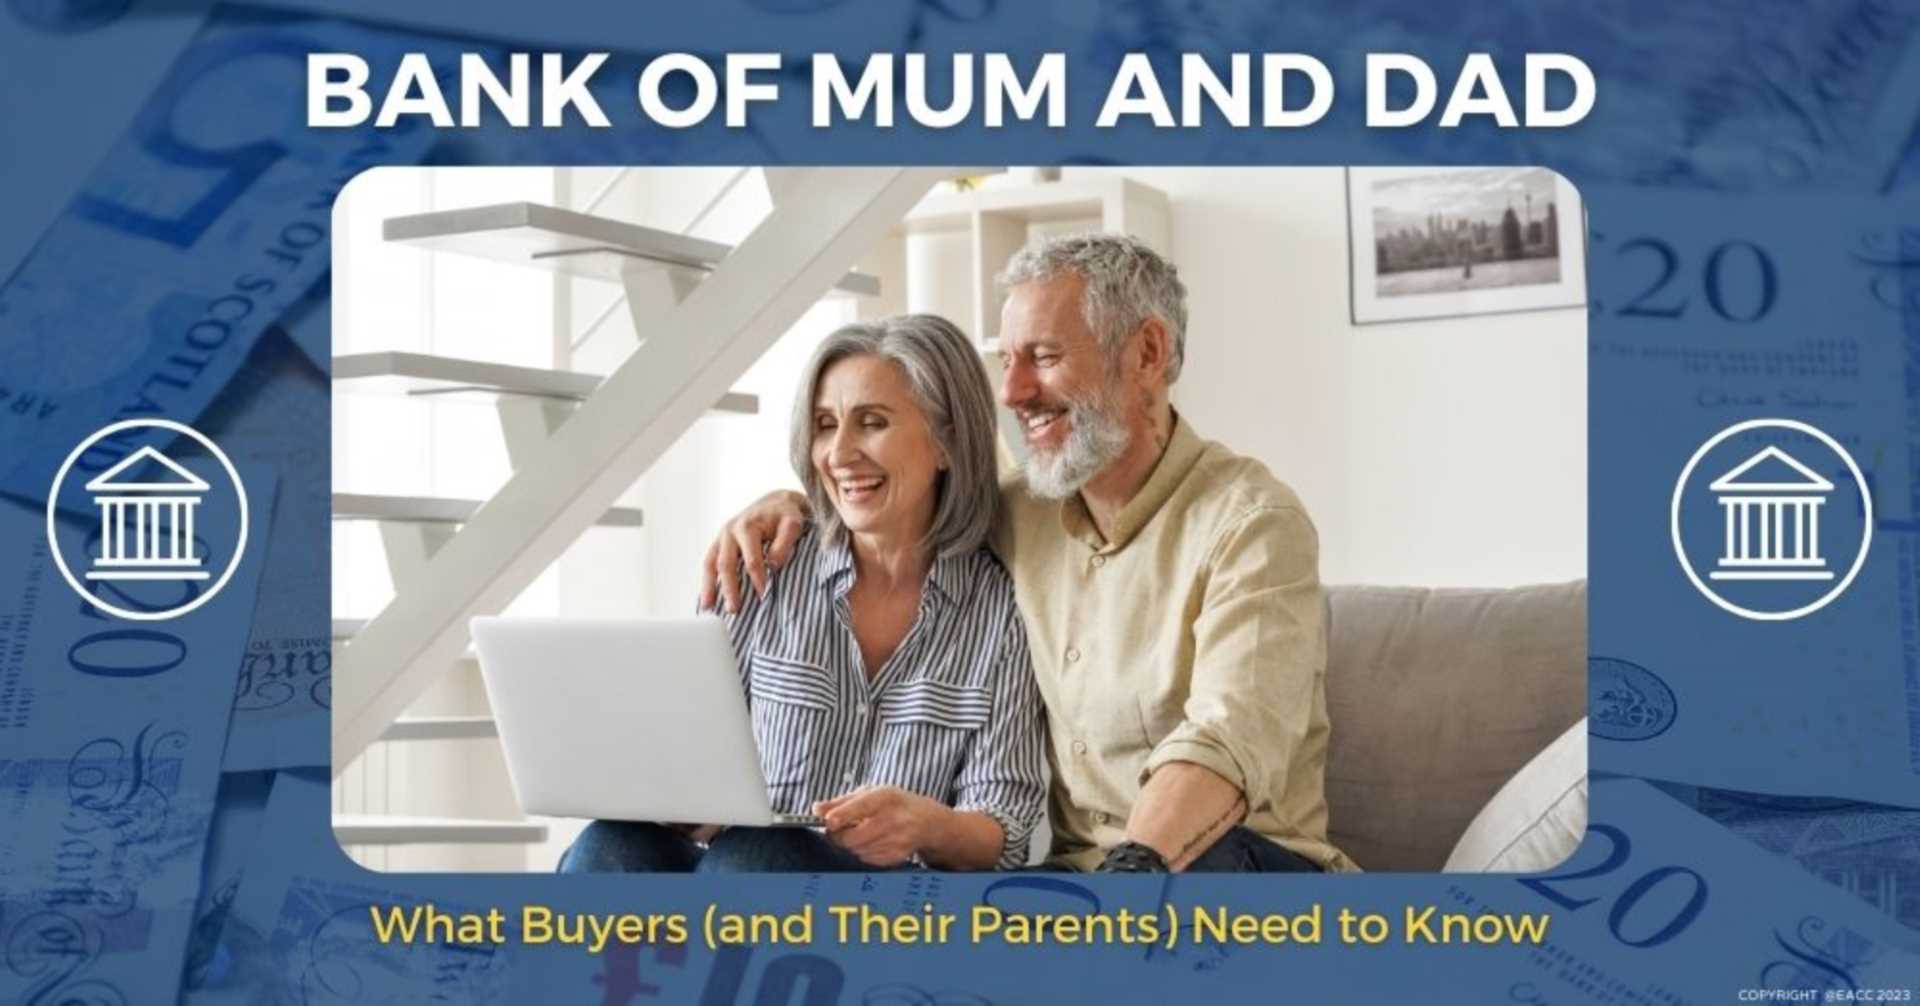 Bank of Mum and Dad: What Buyers (and Their Parents) Need to Know